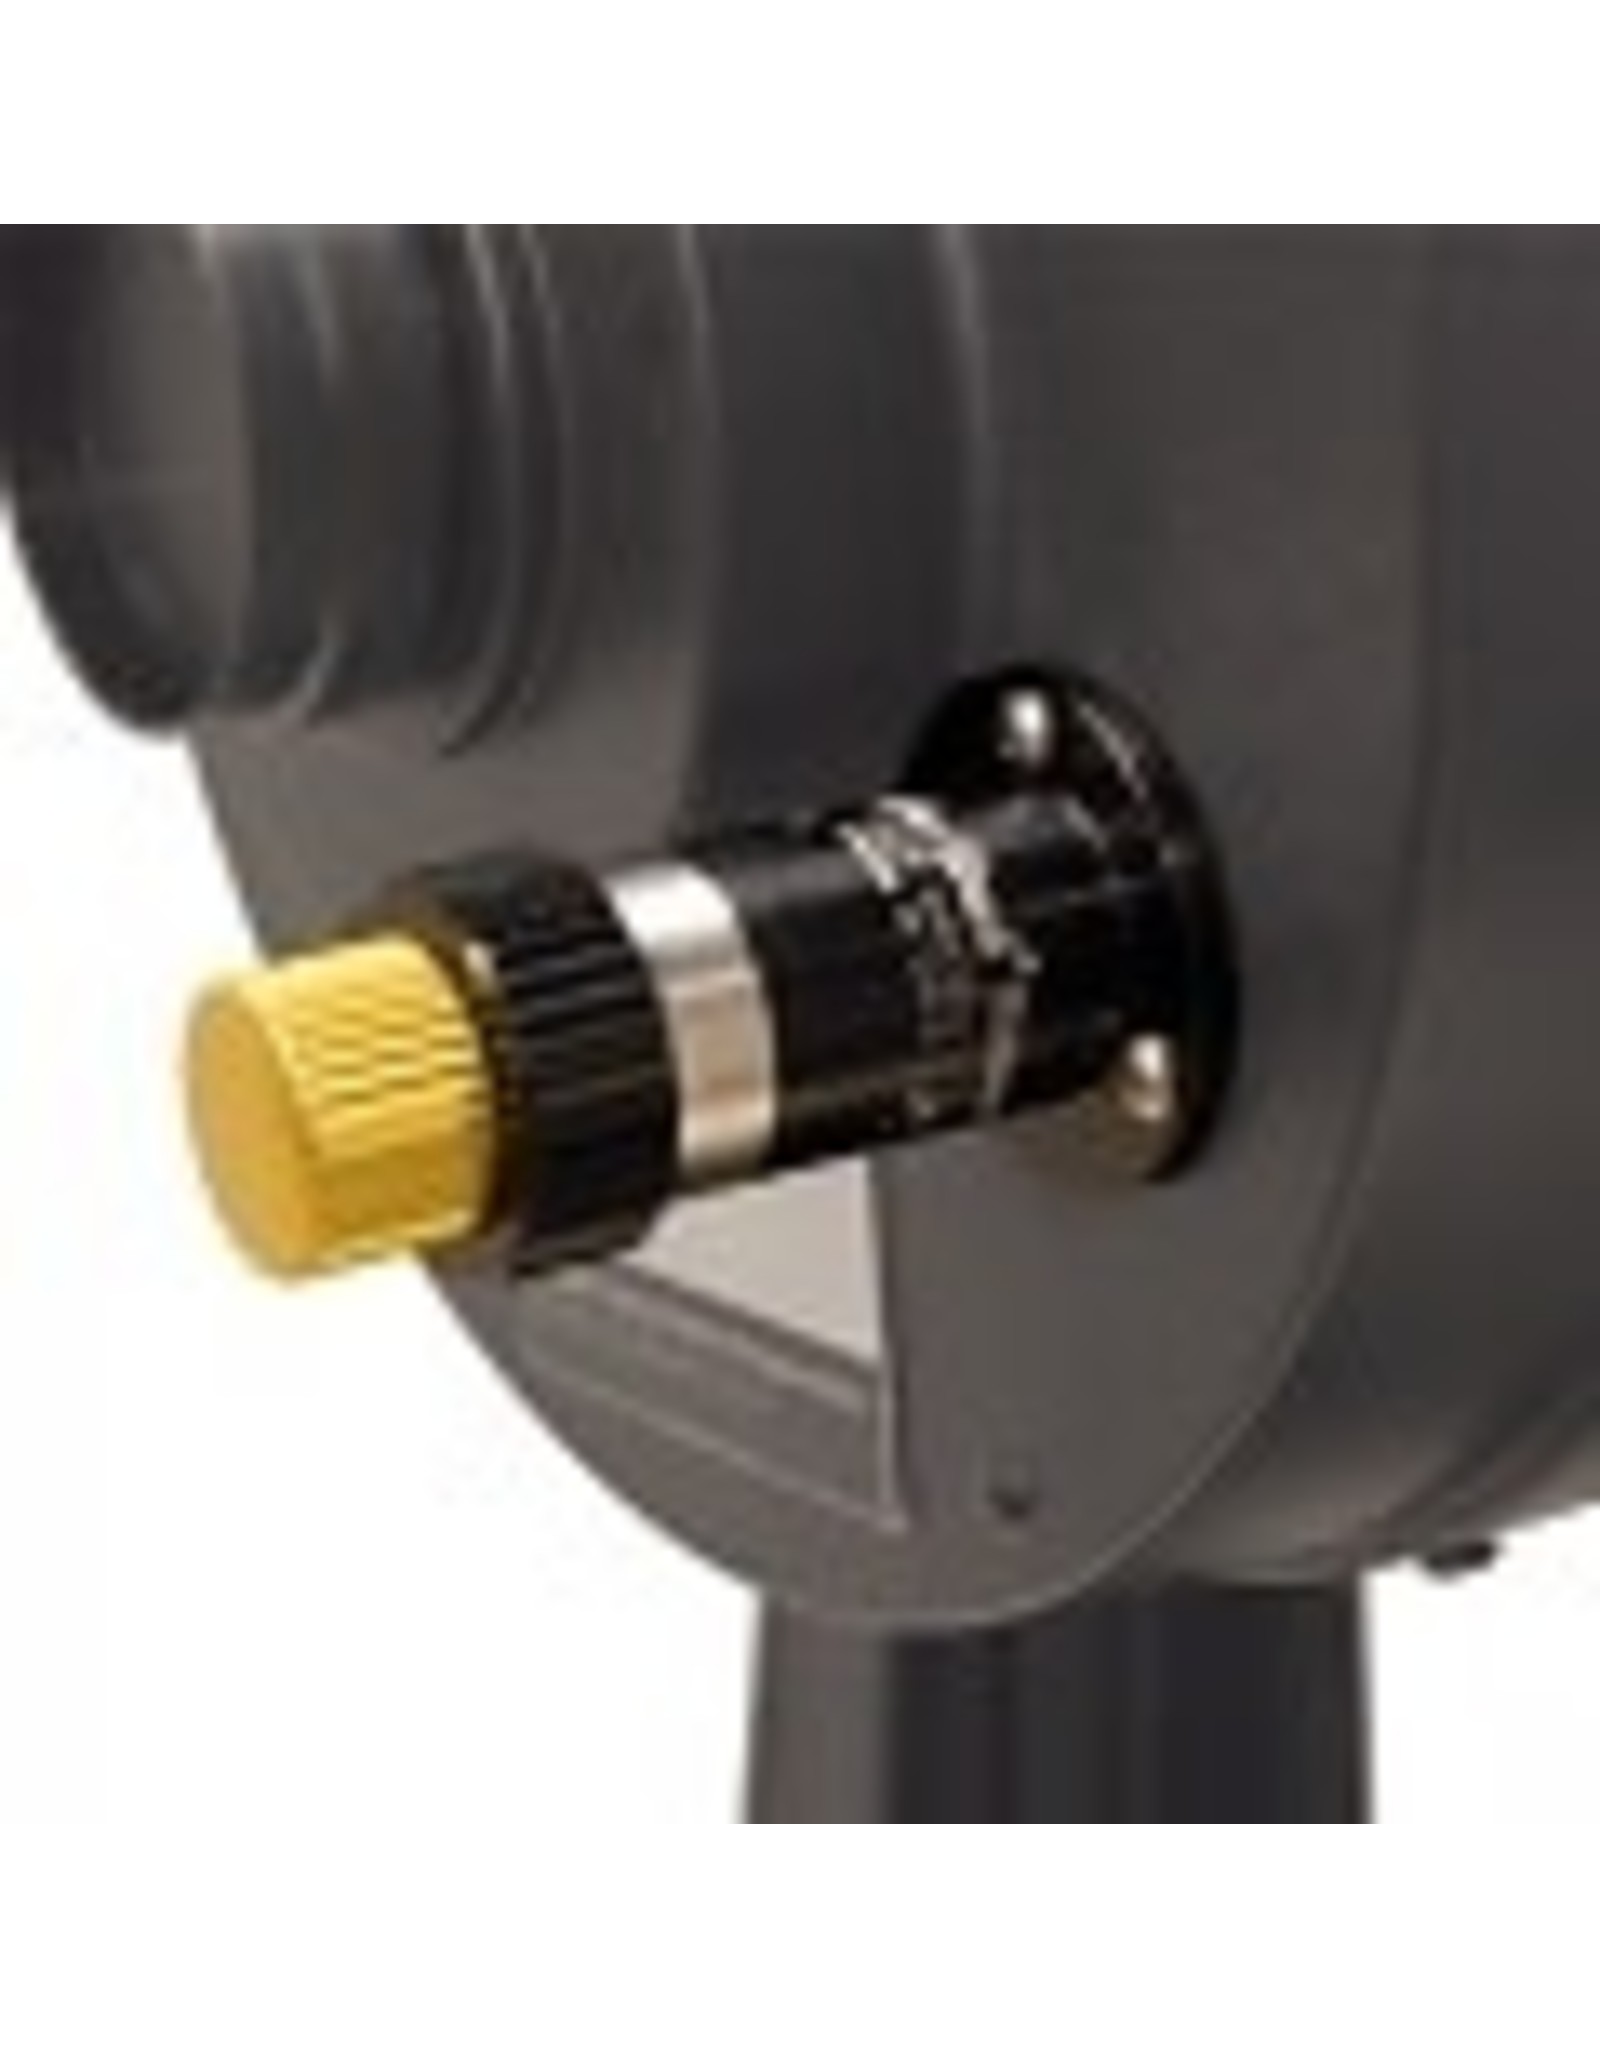 Feathertouch Feathertouch FTM-M1012-F8--Micro for Meade F8 10" or 12" Schmidt-Cassegrain Telescopes